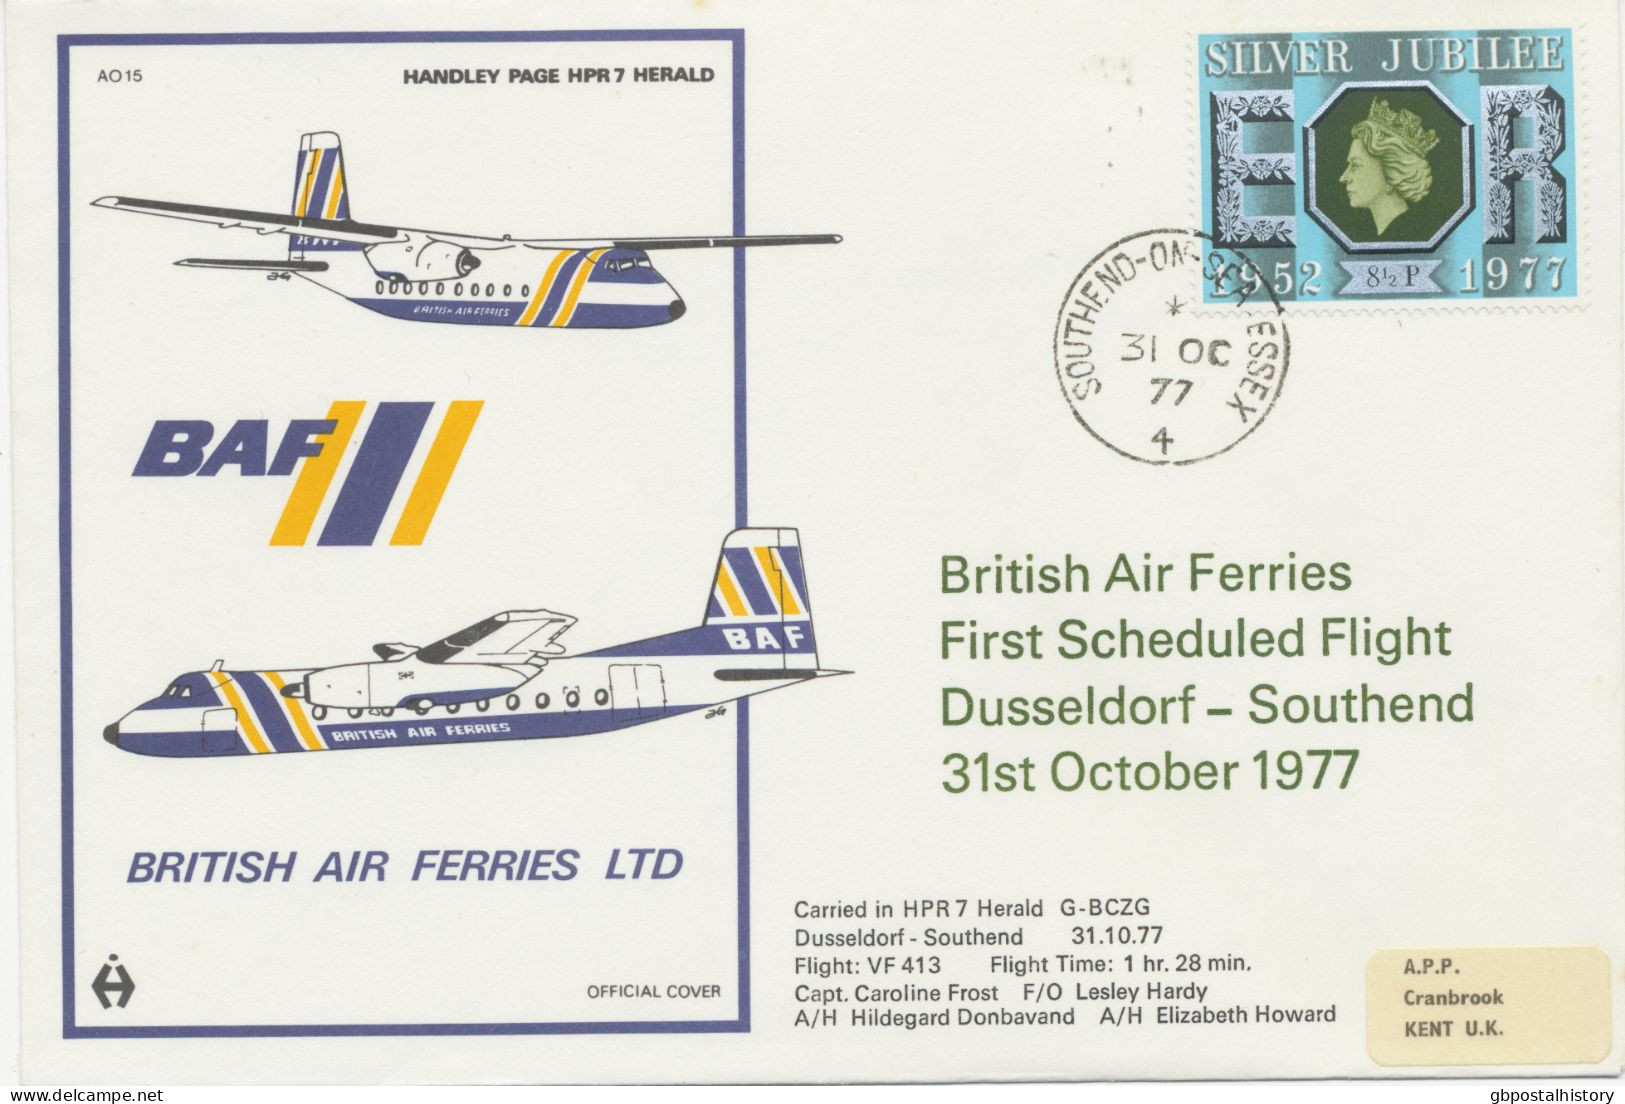 GB 1977 First Flight With British Air Ferries Ltd (BAF - Existed From 1967 To 1993) Via Handley Page HPR7 Herald - Covers & Documents